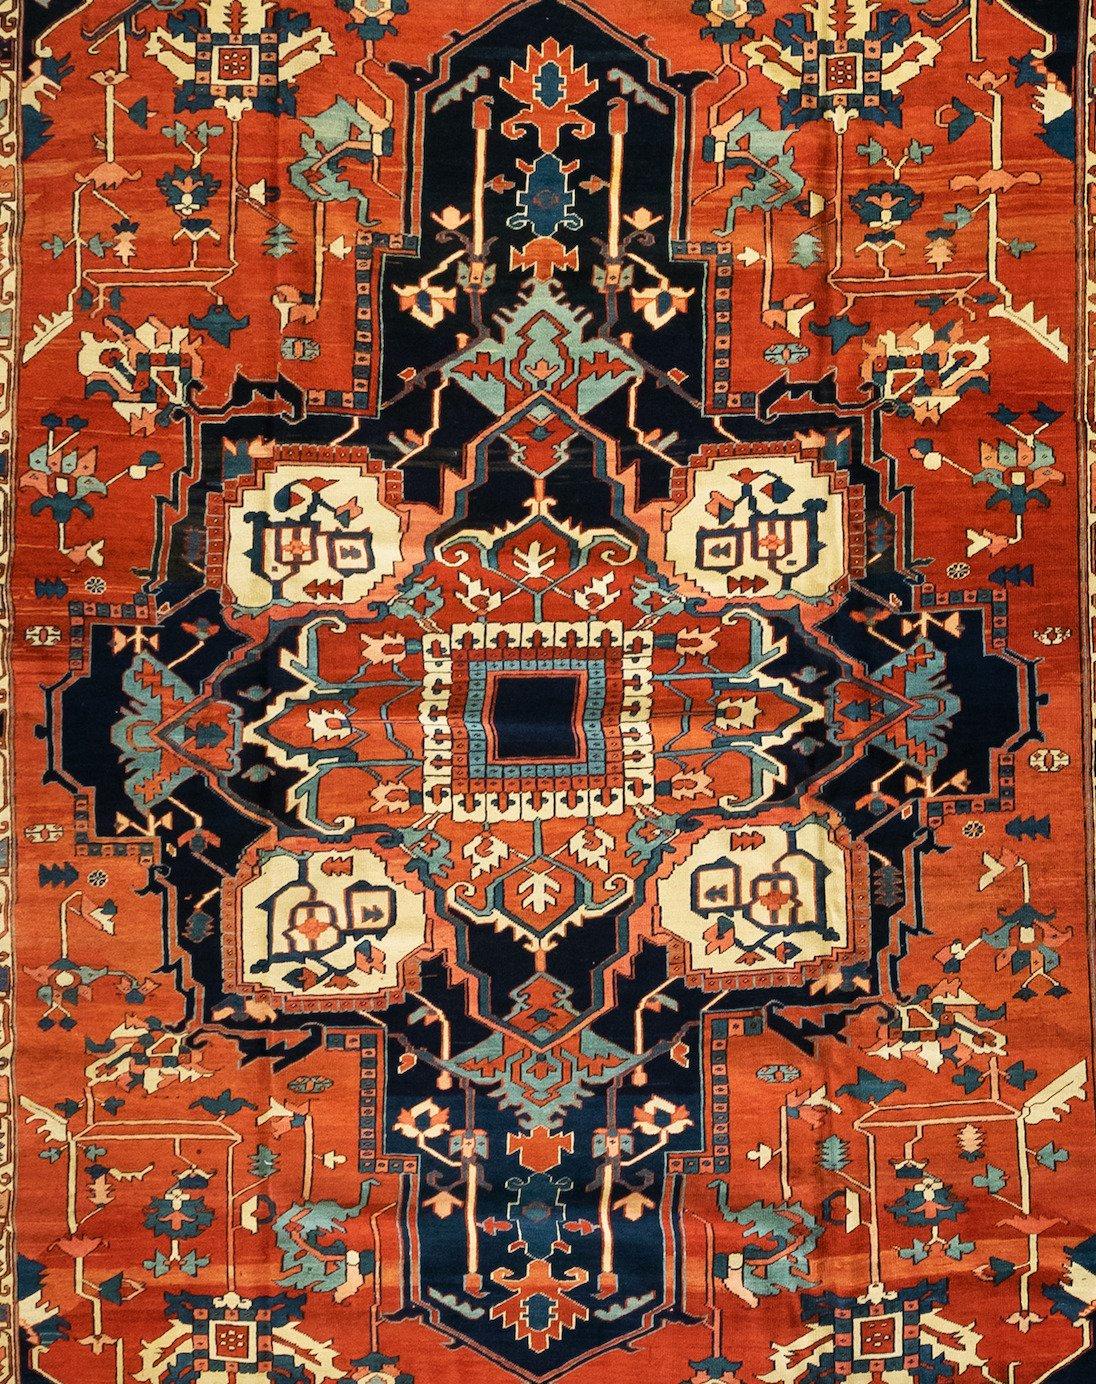 This is an exquisite hand knotted antique Persian Serapi carpet with a medallion geometric design from circa 1880-1900. This rug measures 12 x 19.6 ft. and is in pristine condition.